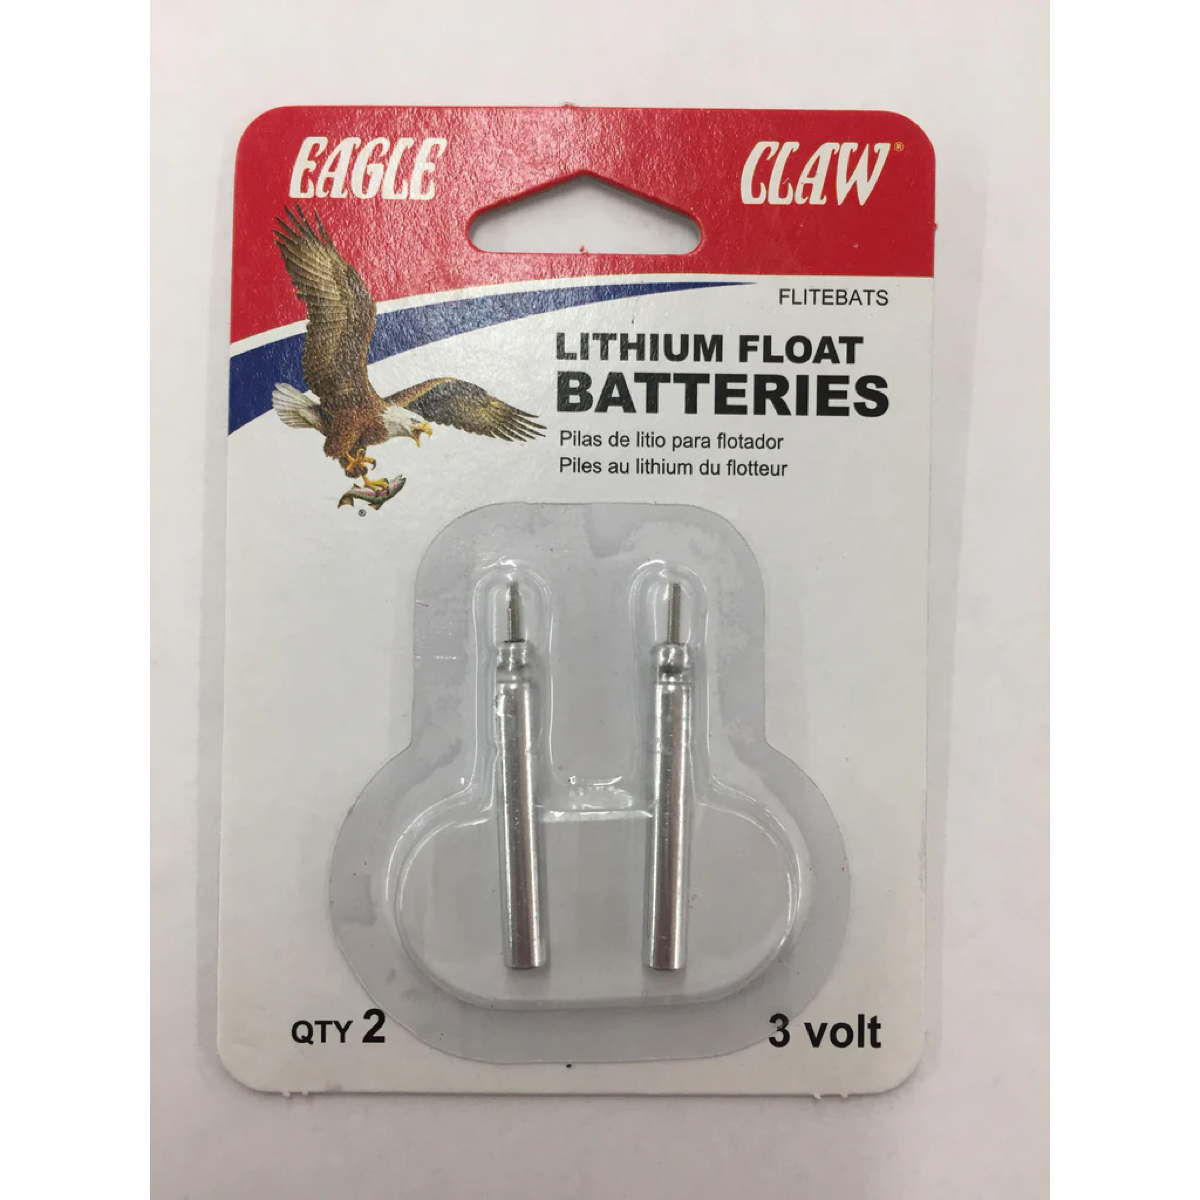 Photo of Eagle Claw Lithium Float Batteries for sale at United Tackle Shops.